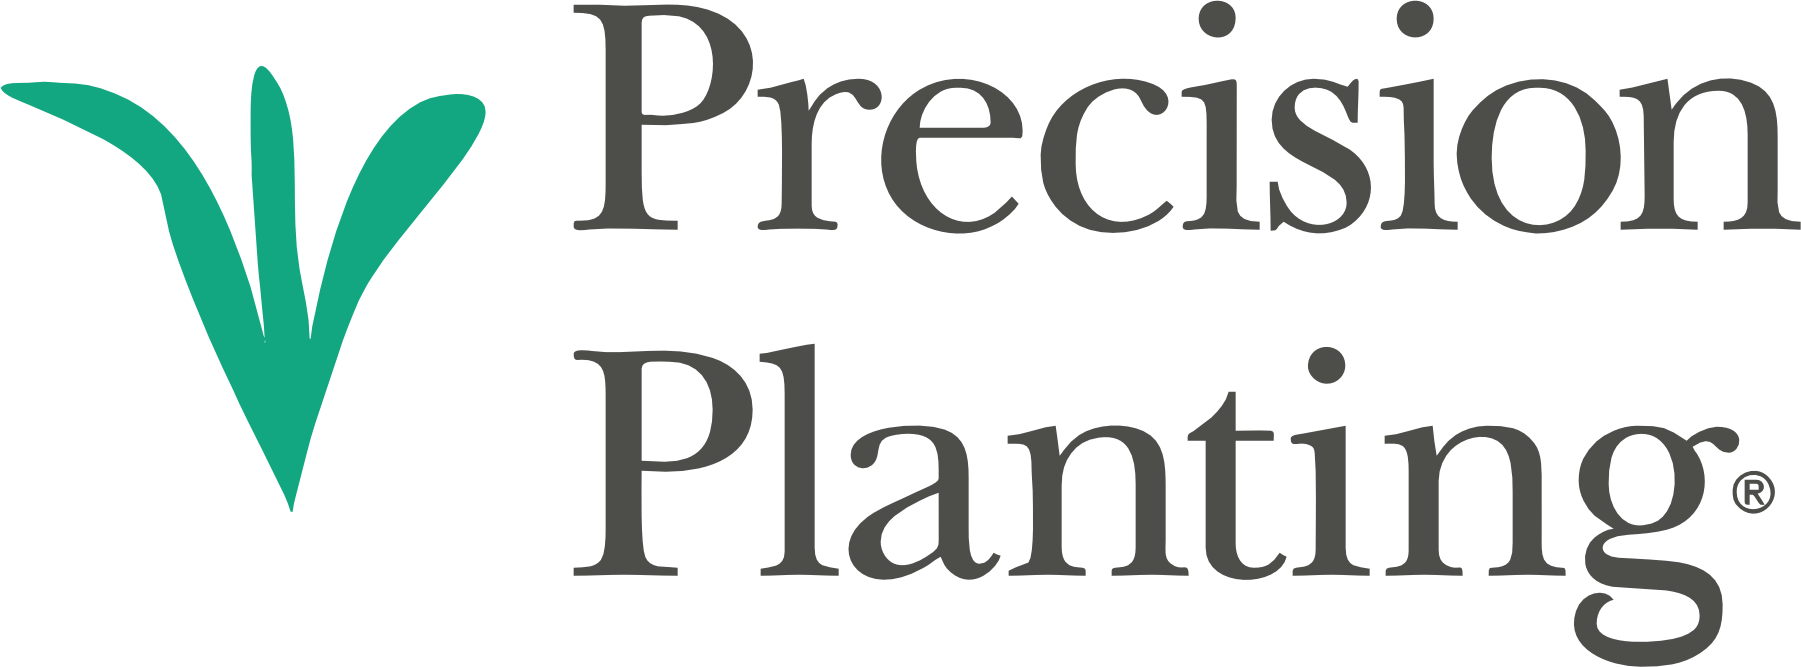 Precision Planting - Traced.png